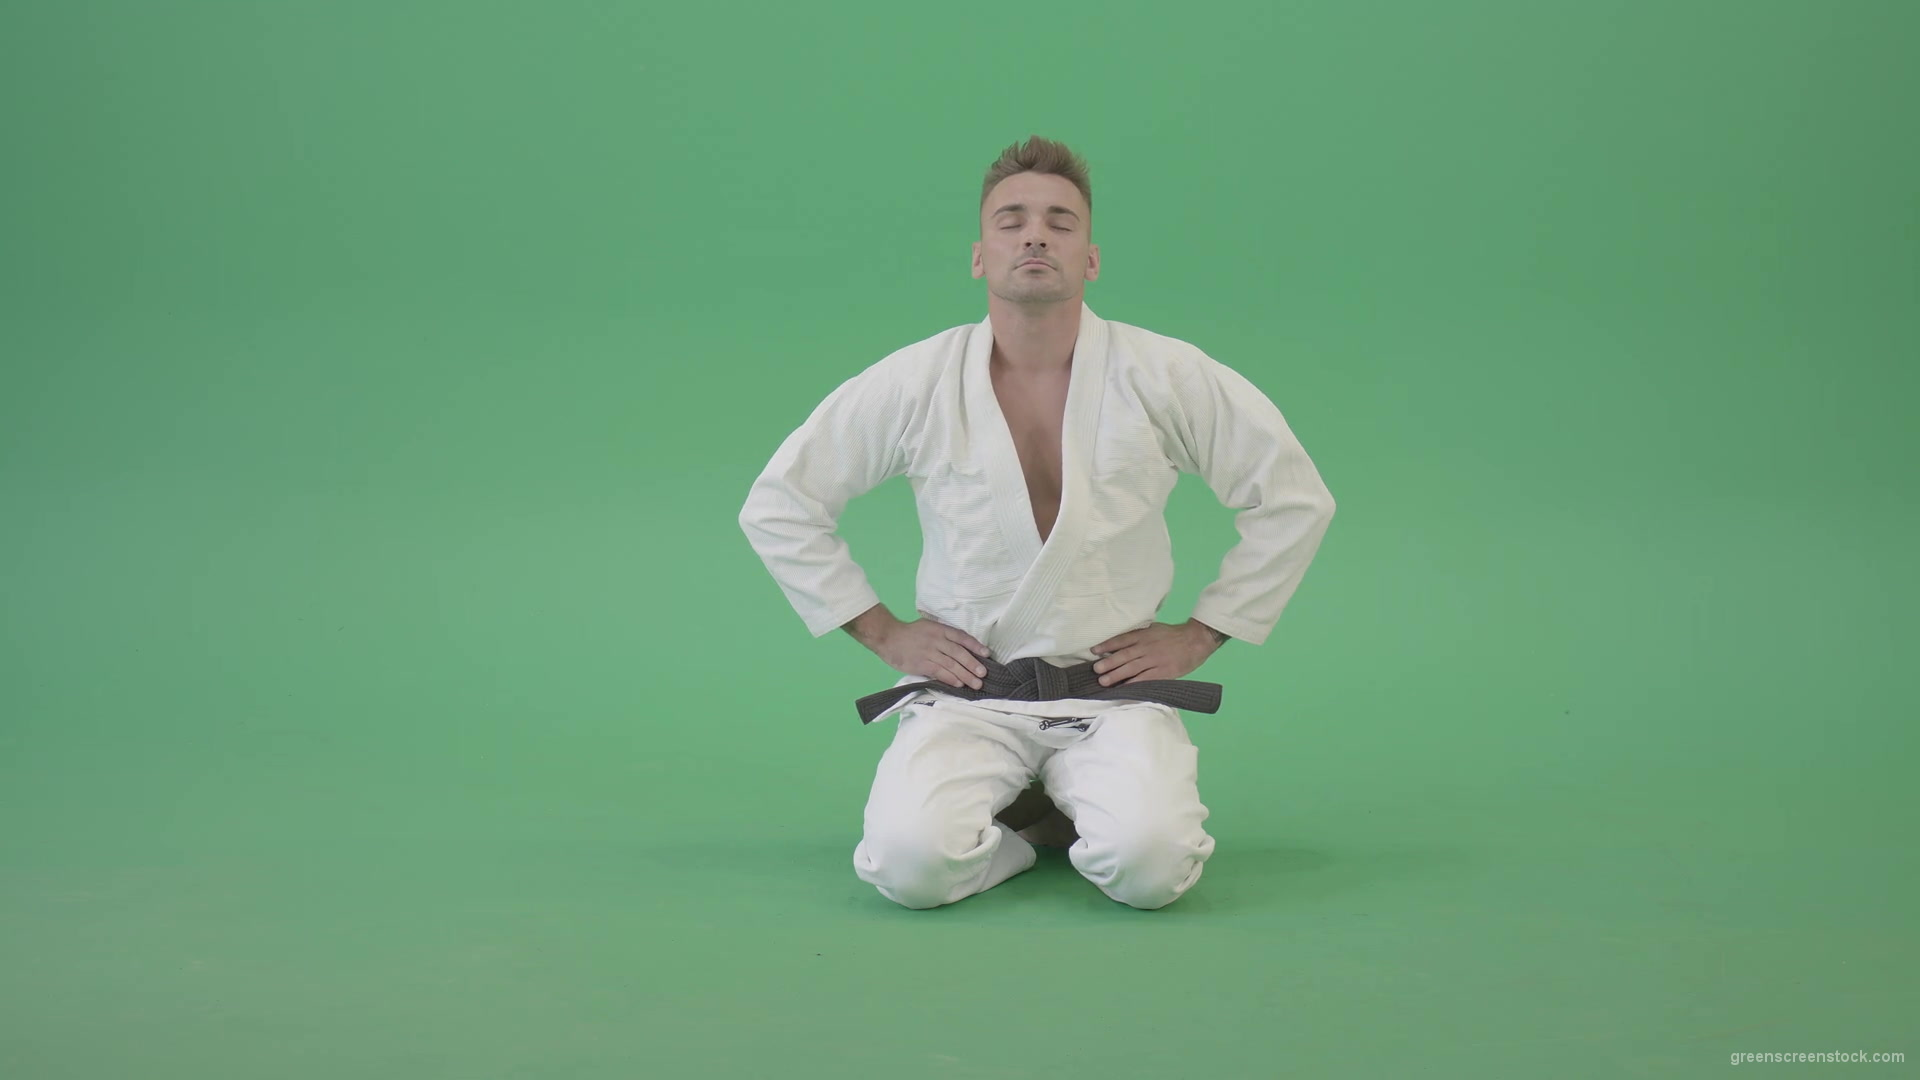 Jujutsu-Sport-man-meditating-and-breathing-slowly-isolated-on-green-screen-4K-Video-Footage-1920_006 Green Screen Stock